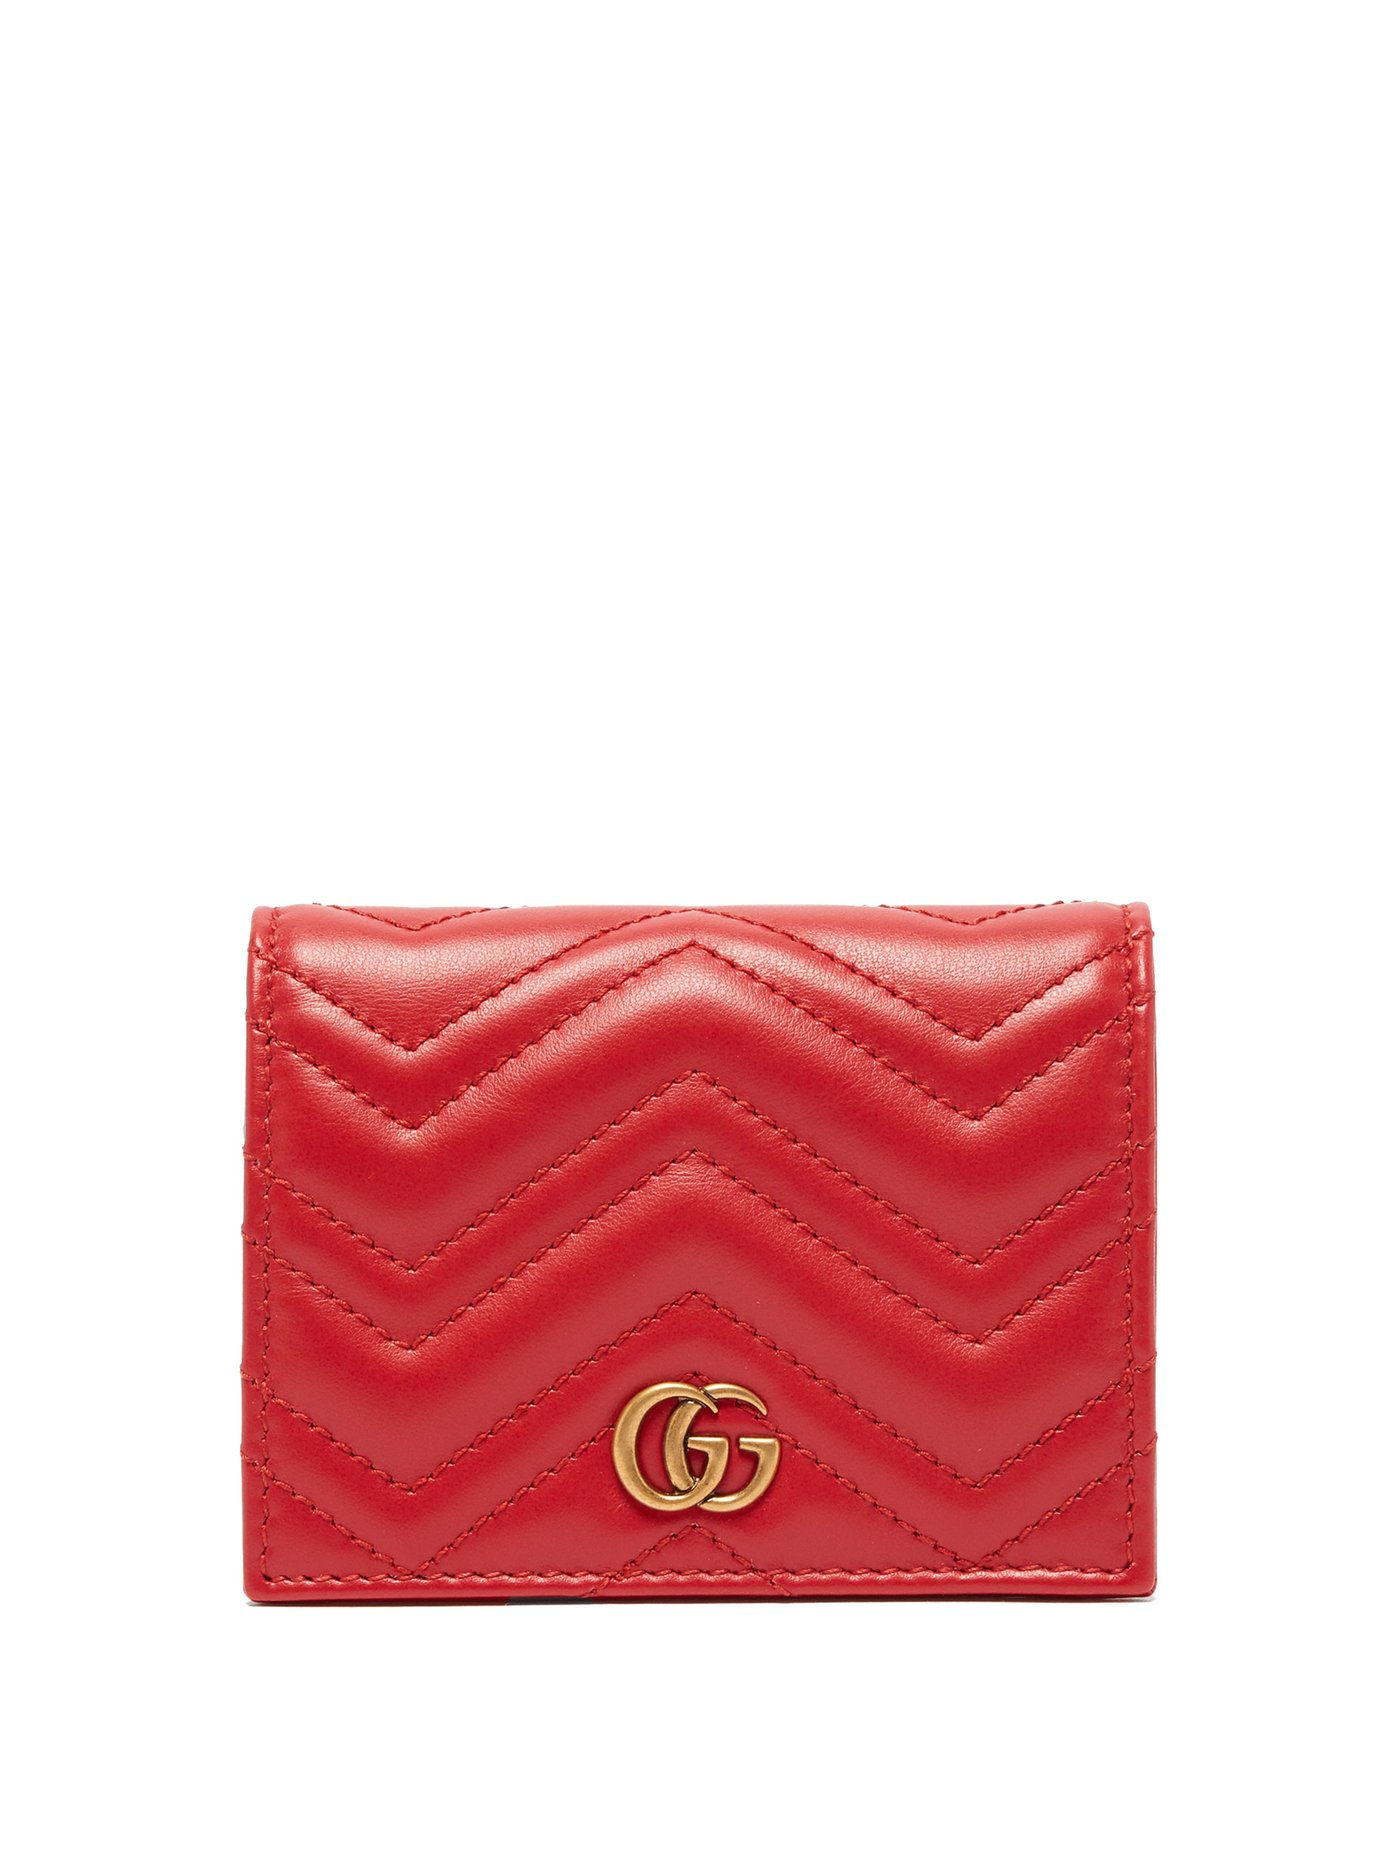 gucci marmont red wallet